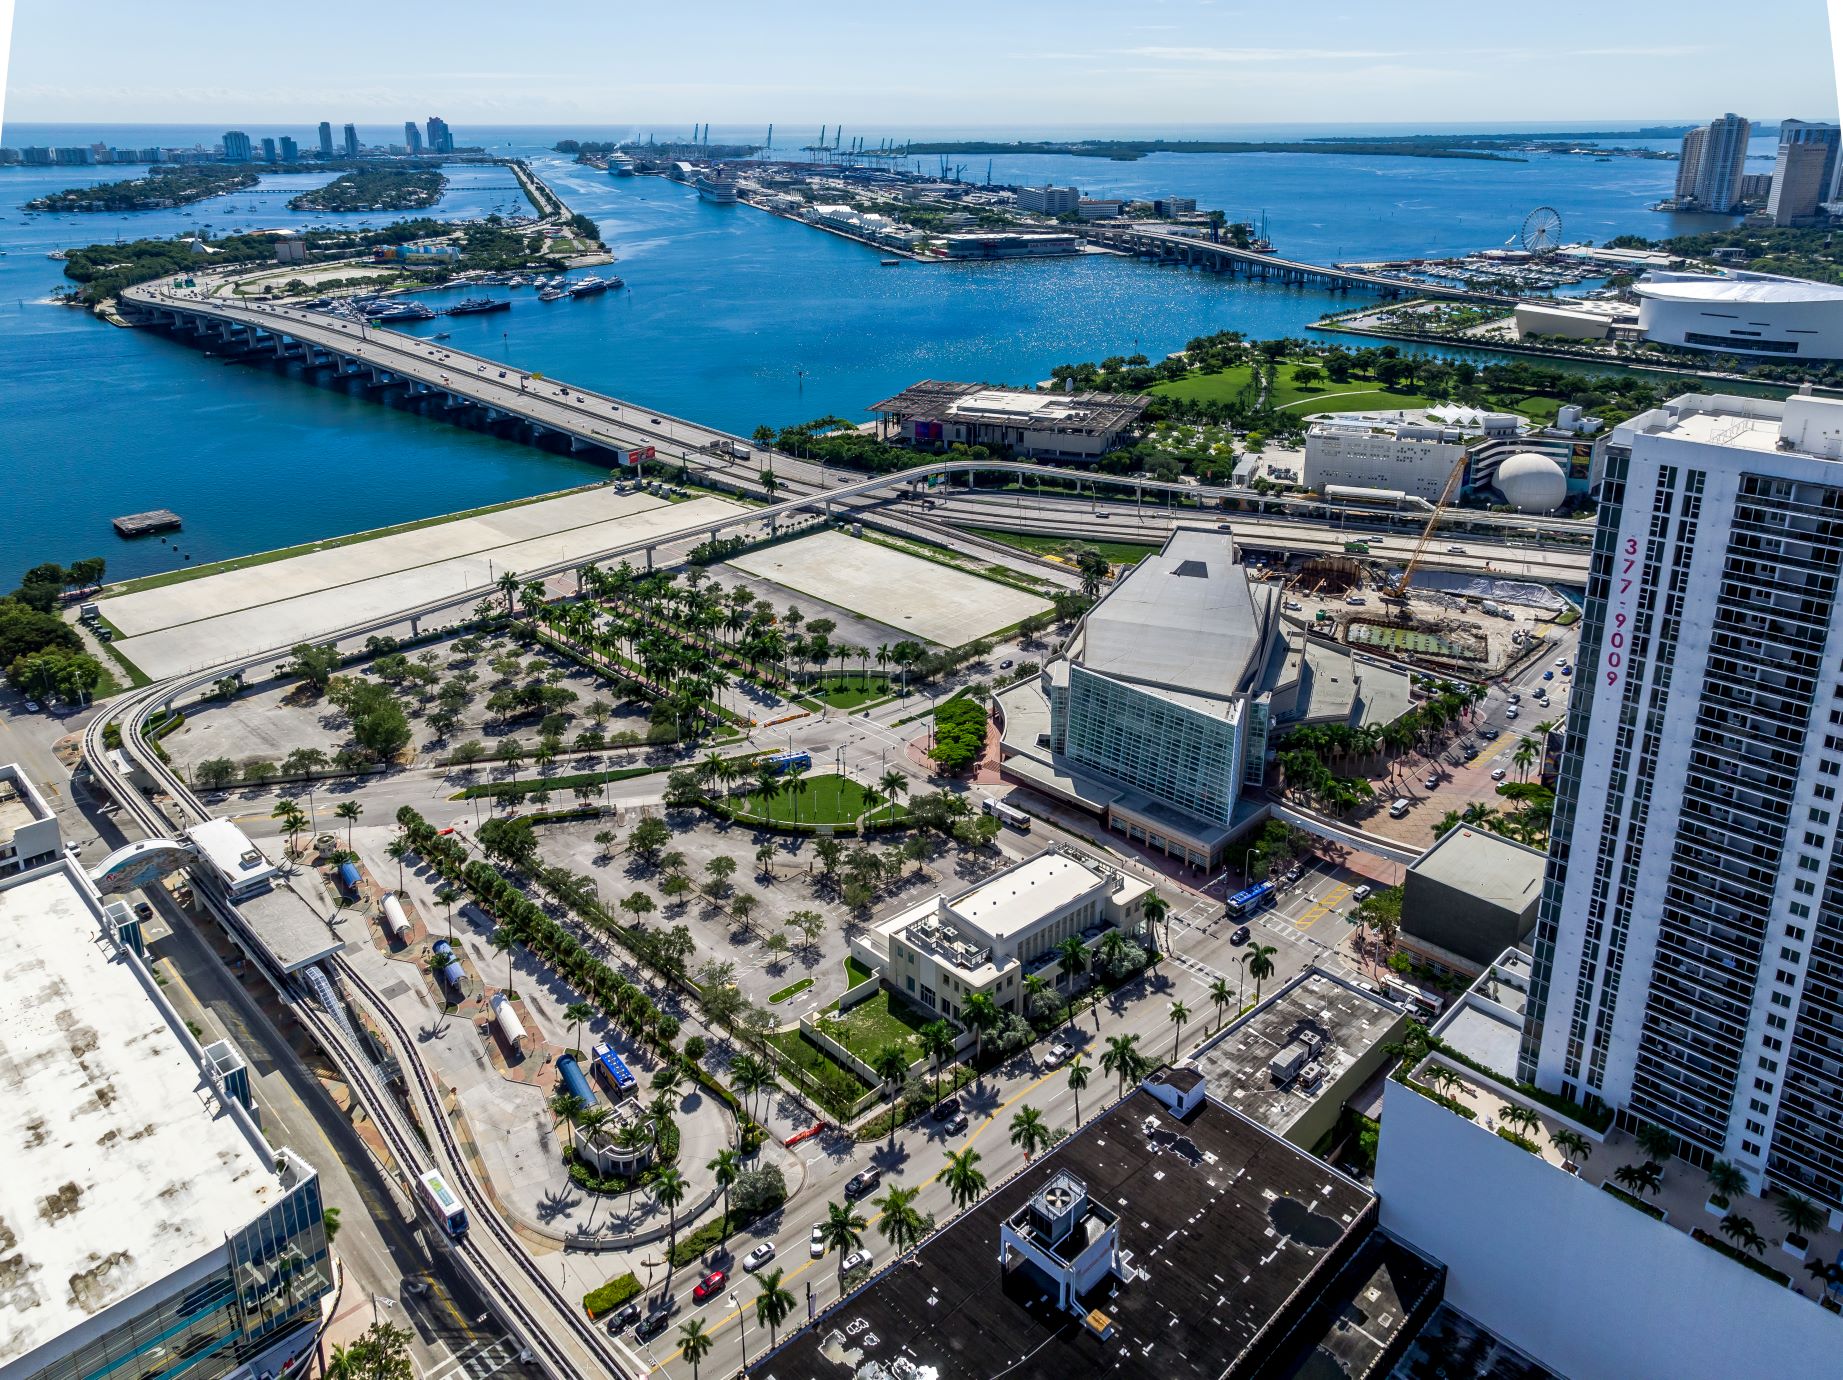 Avison Young to sell iconic ±15.5-acre BayCity Miami development site, one of the largest and most valuable waterfront land assemblages in the U.S.